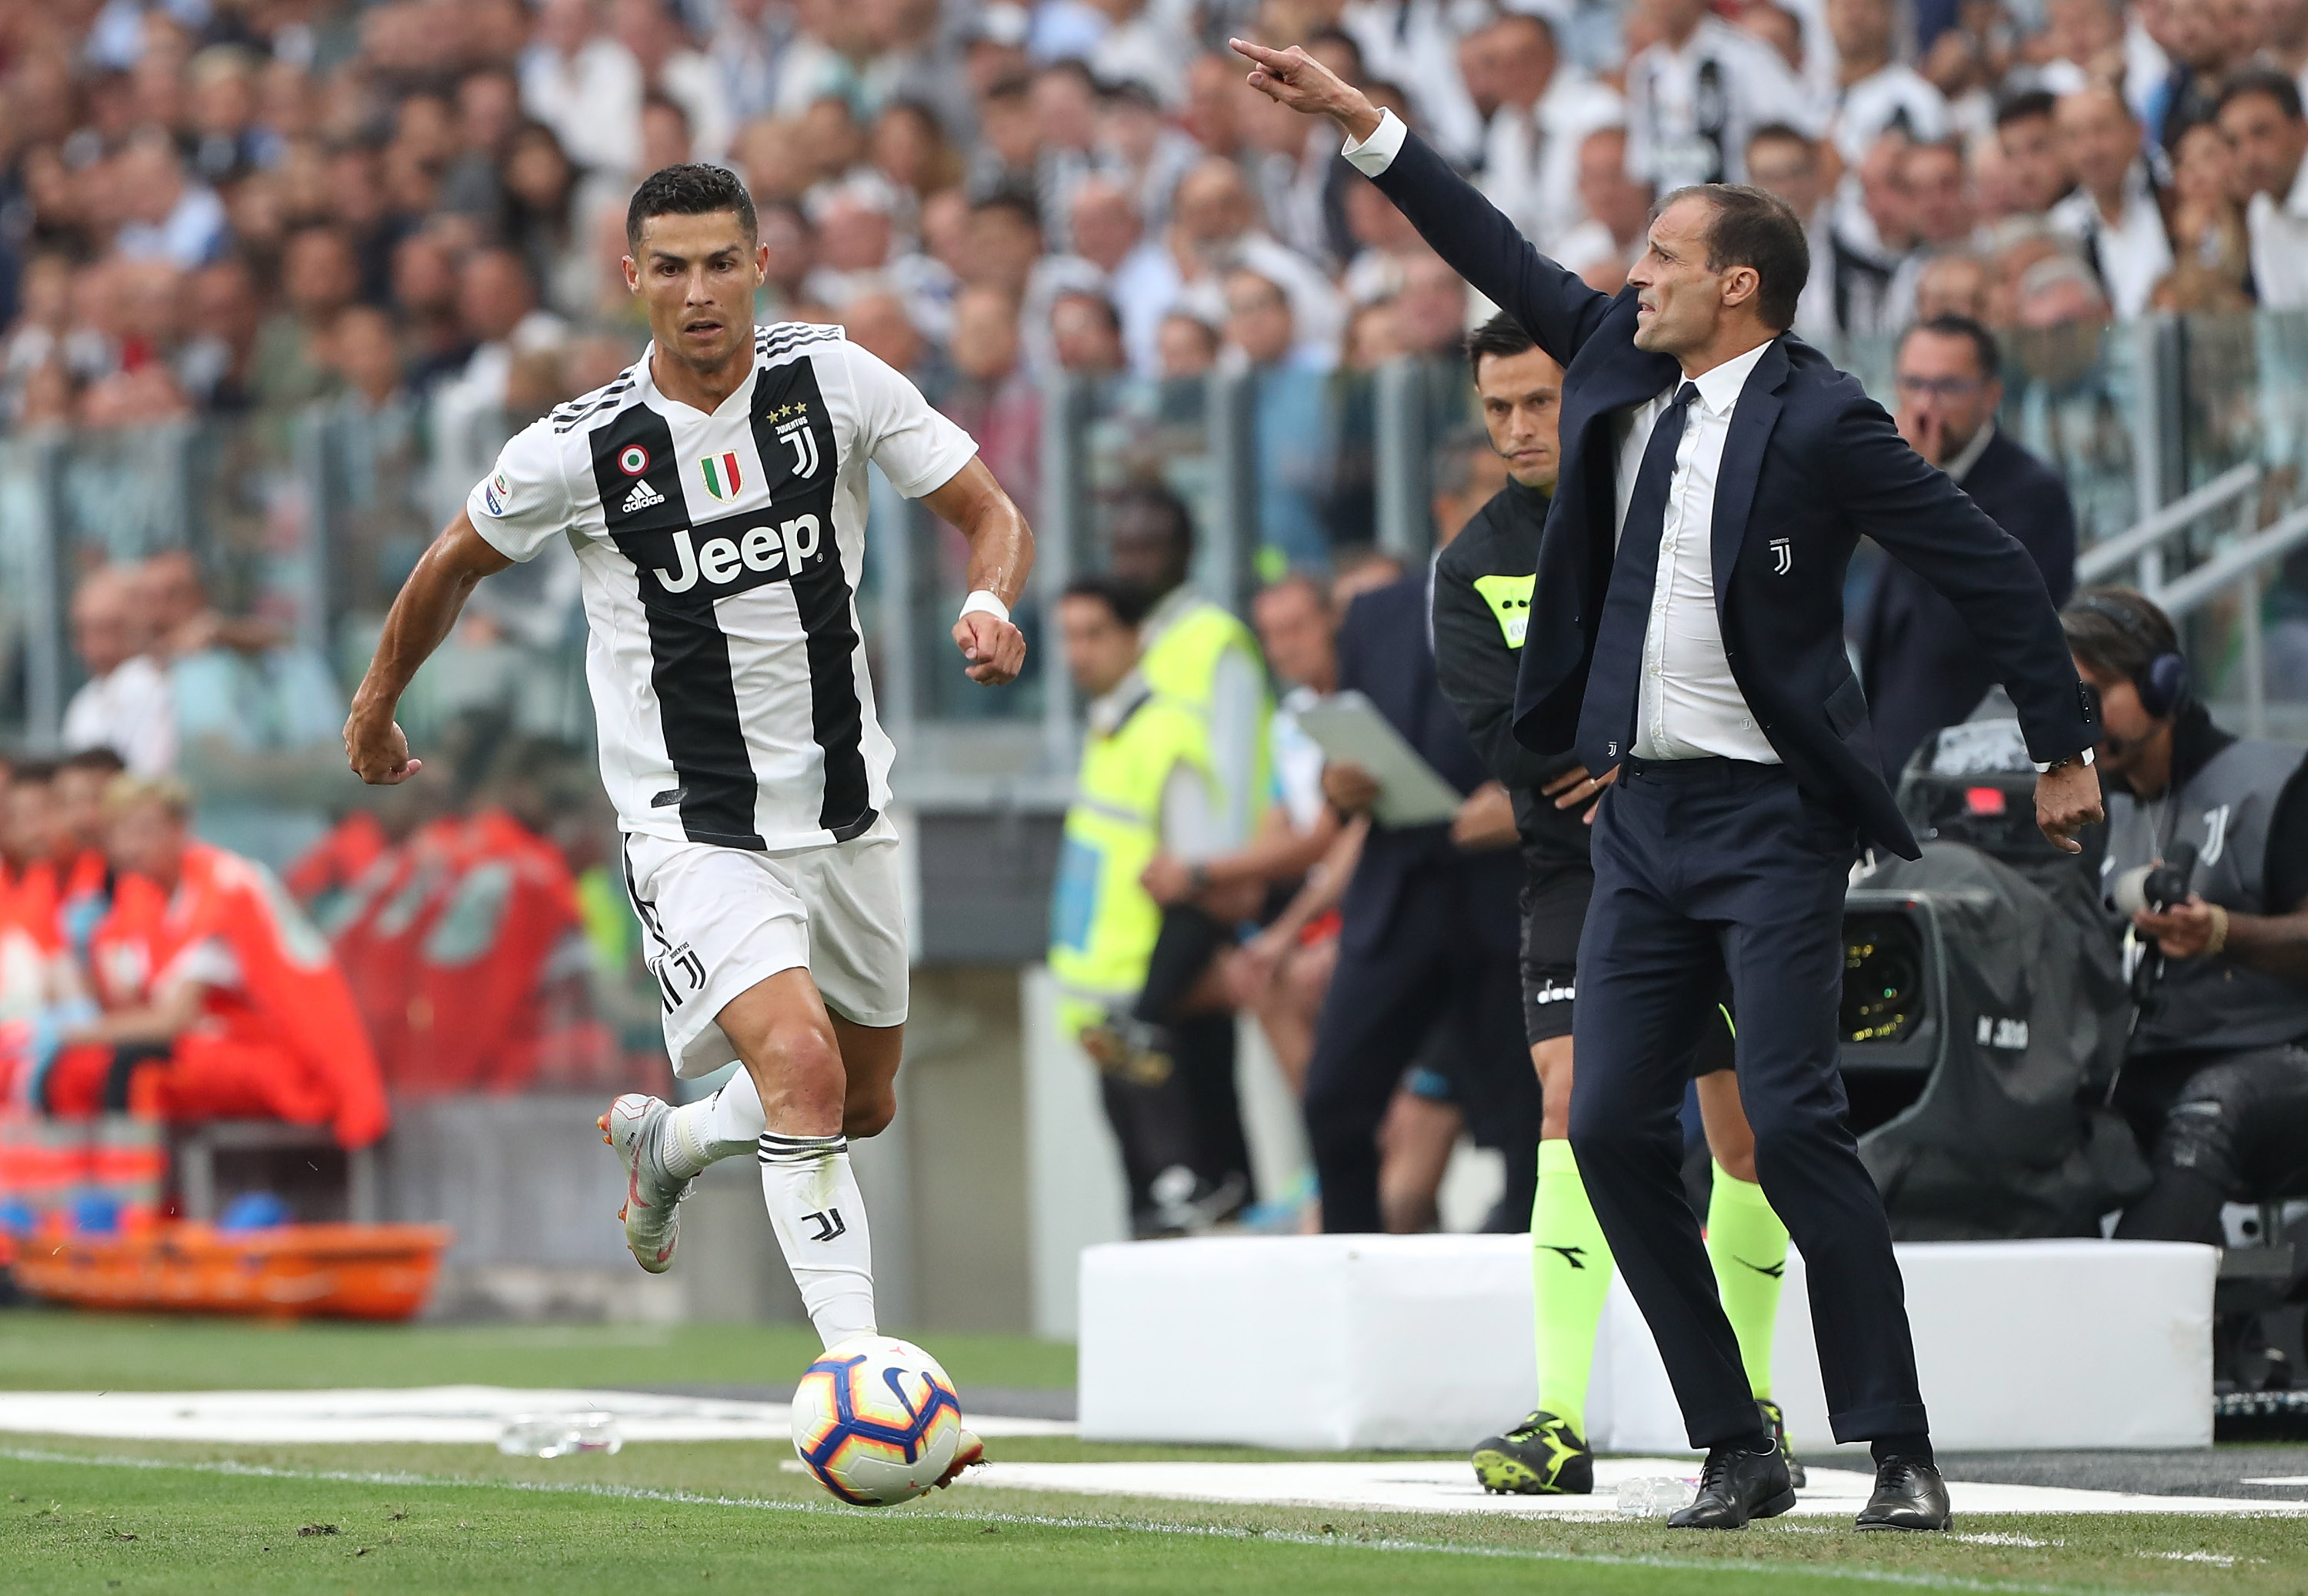 TURIN, ITALY - AUGUST 25:  Cristiano Ronaldo of Juventus in action during the Serie A match between Juventus and SS Lazio at Allianz Stadium on August 25, 2018 in Turin, Italy.  (Photo by Marco Luzzani/Getty Images)